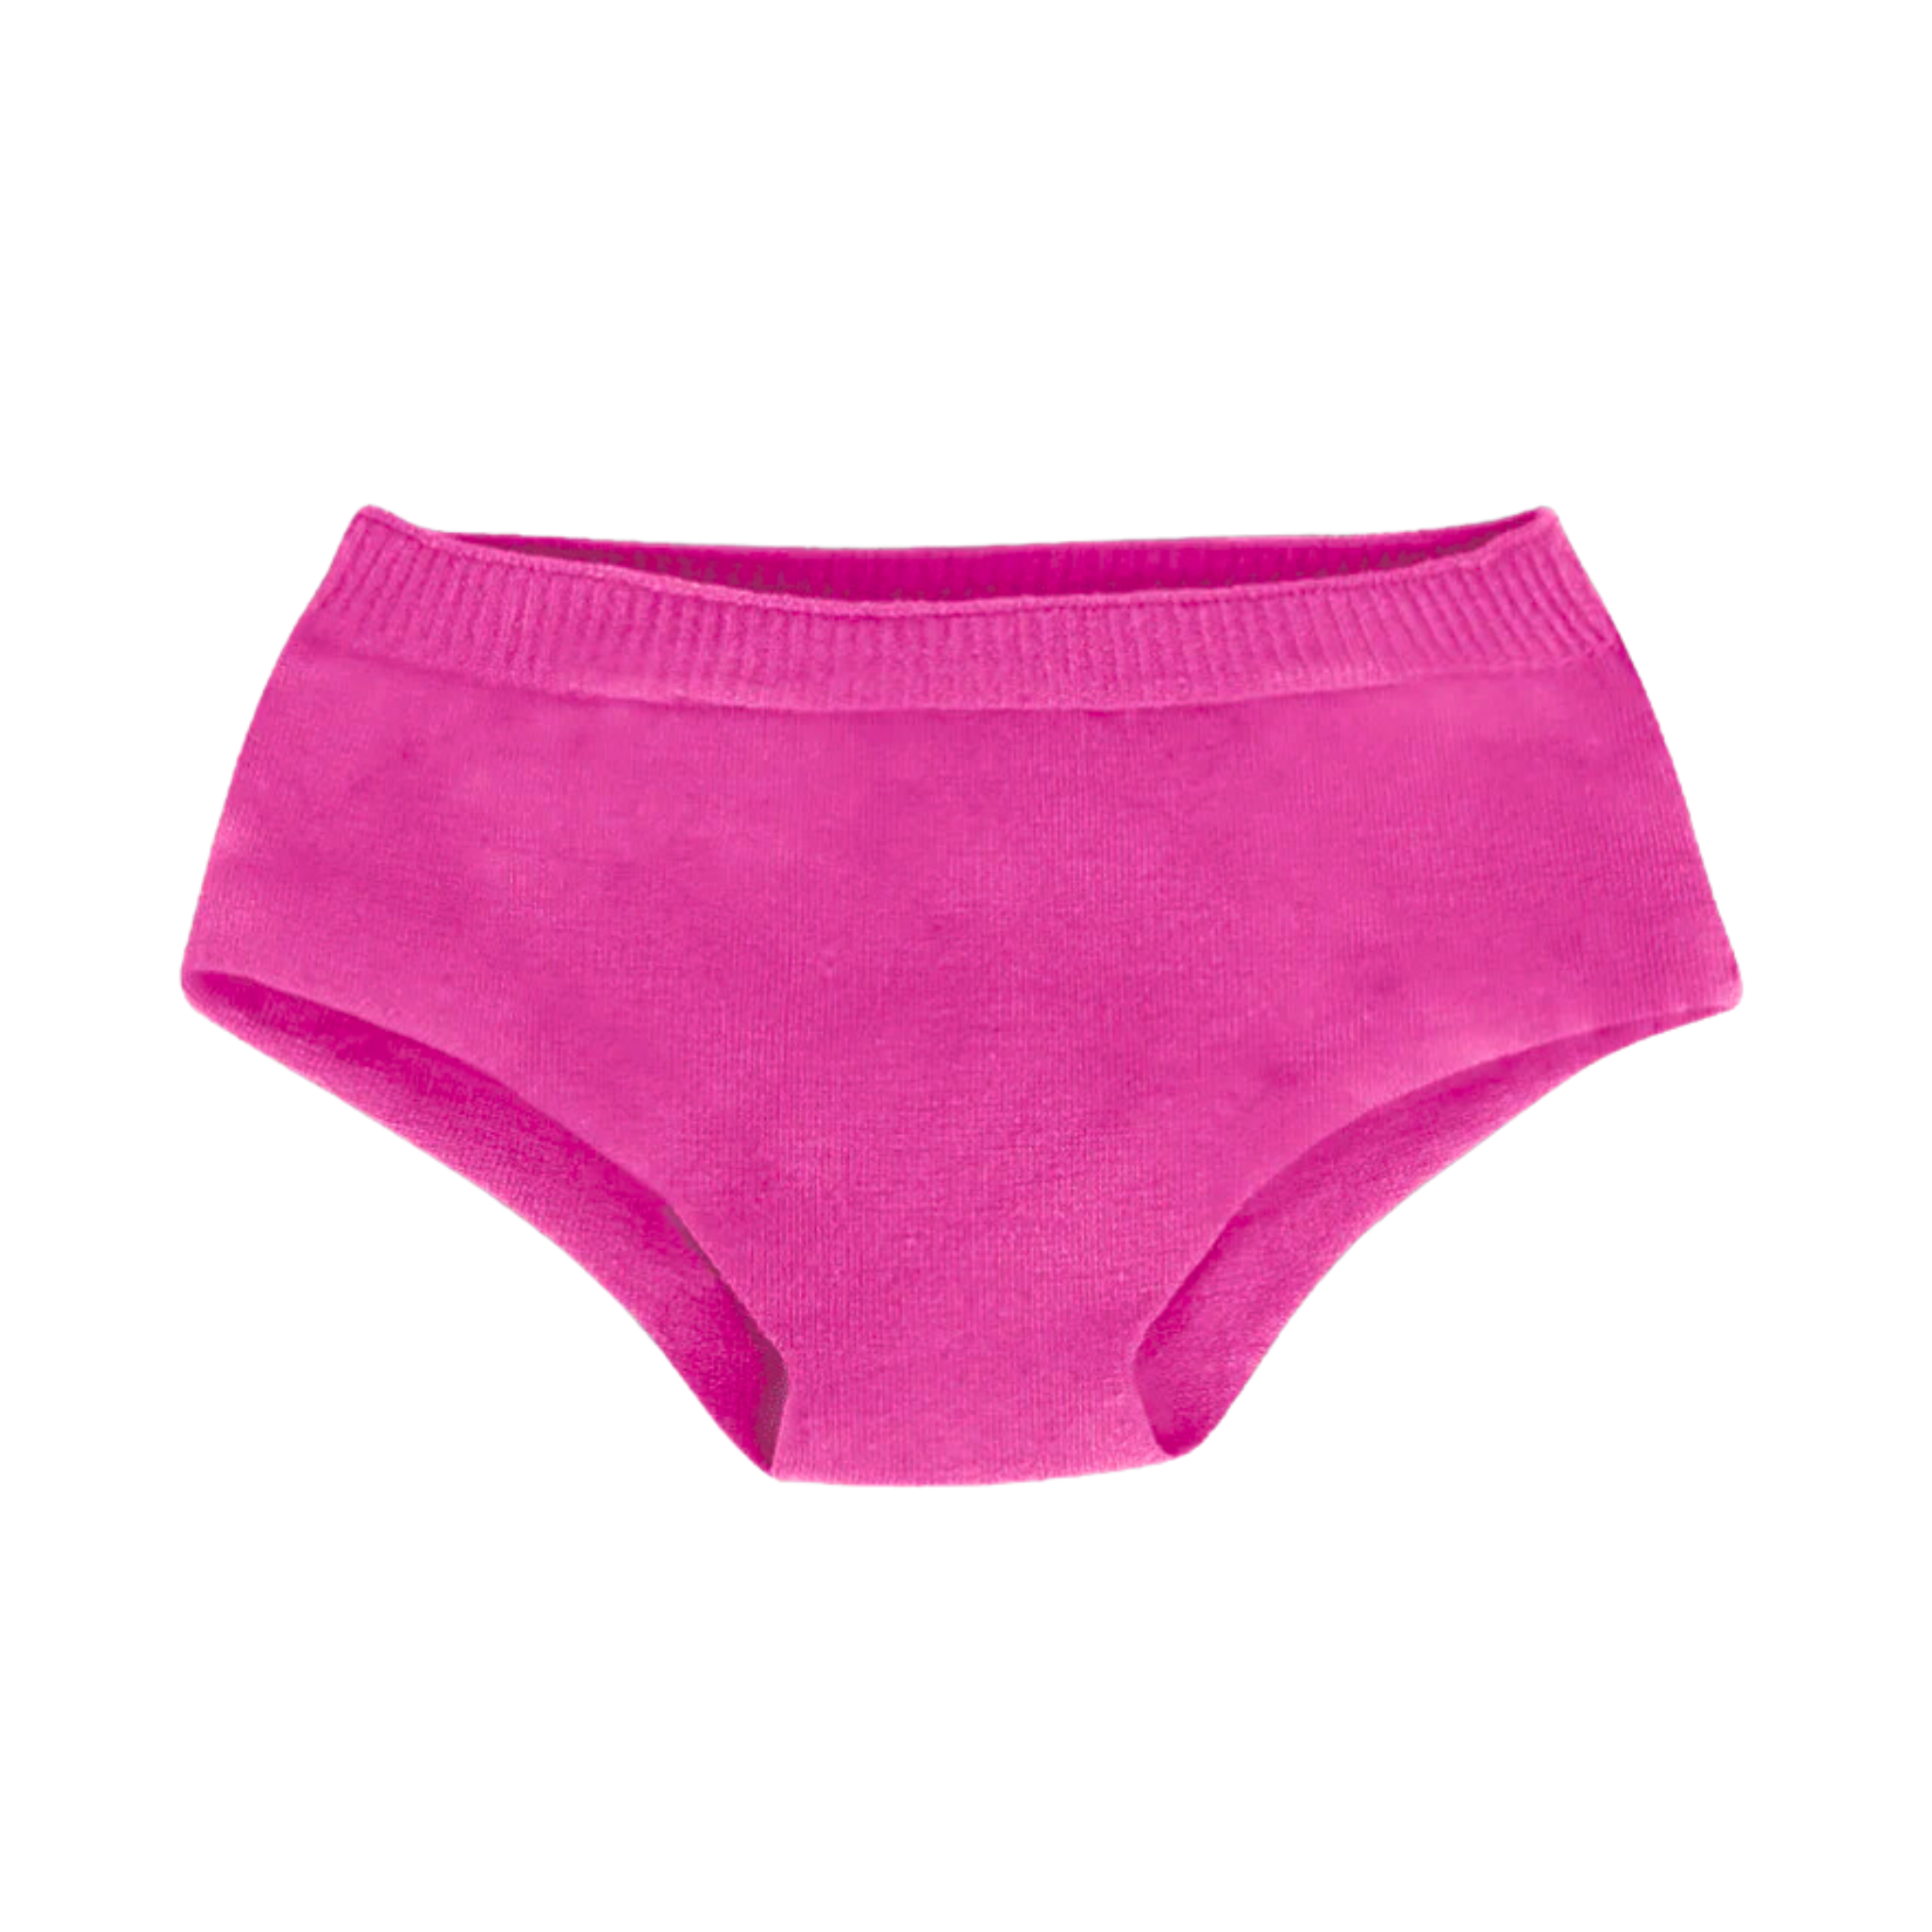 SmartKnitKIDS Seamless Undies for Girls - Single pack Brief Pants